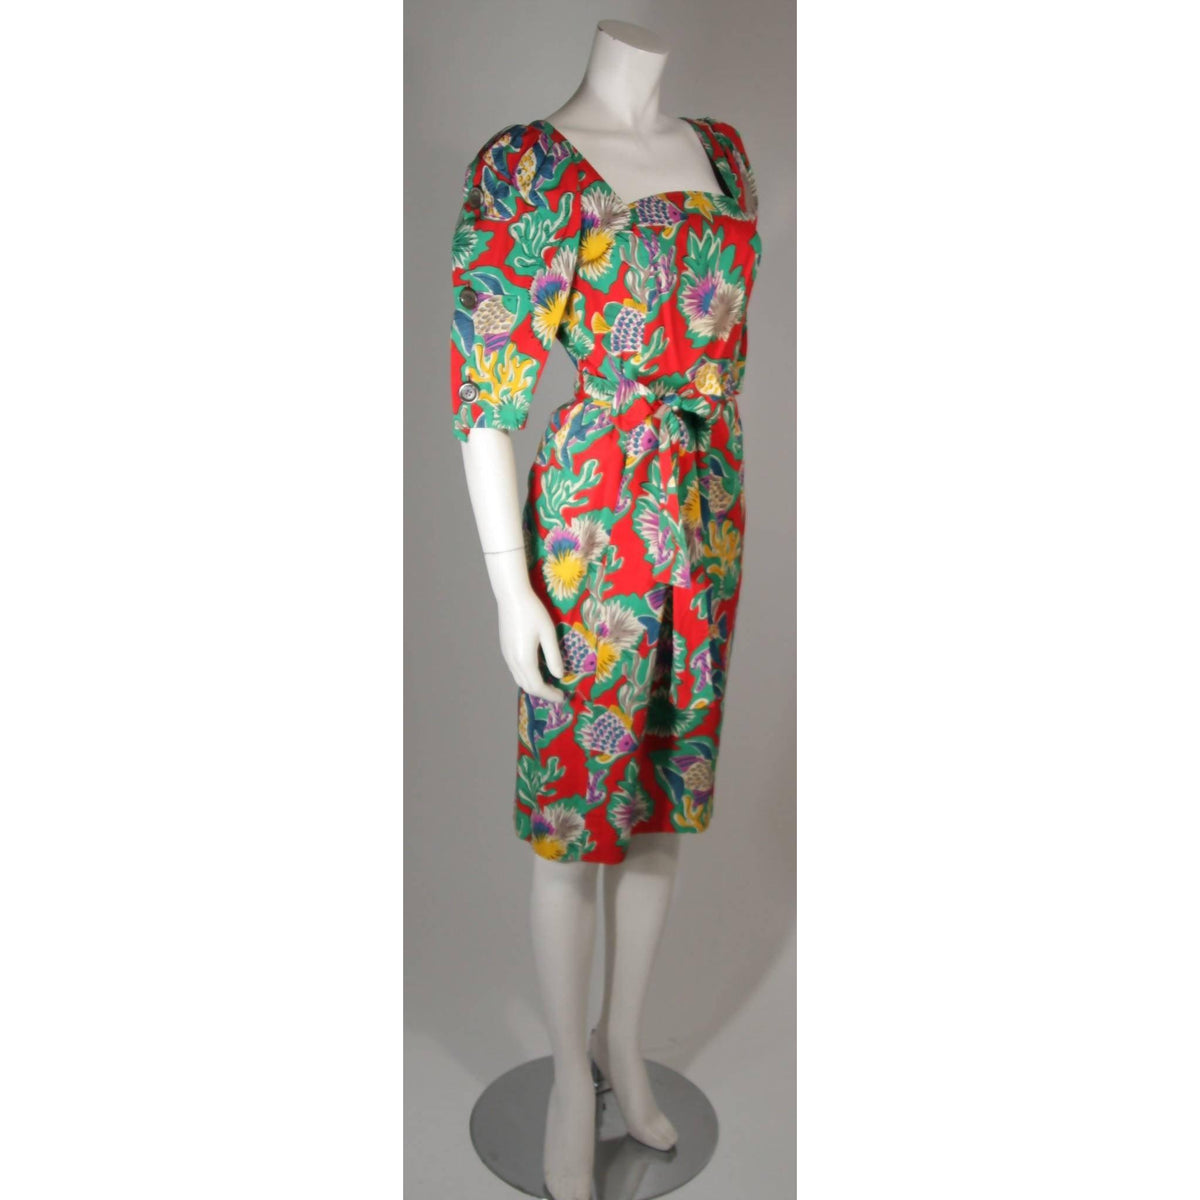 YVES SAINT LAURENT Red Cotton Print Dress | Size US 6 - FR 38 - theREMODA